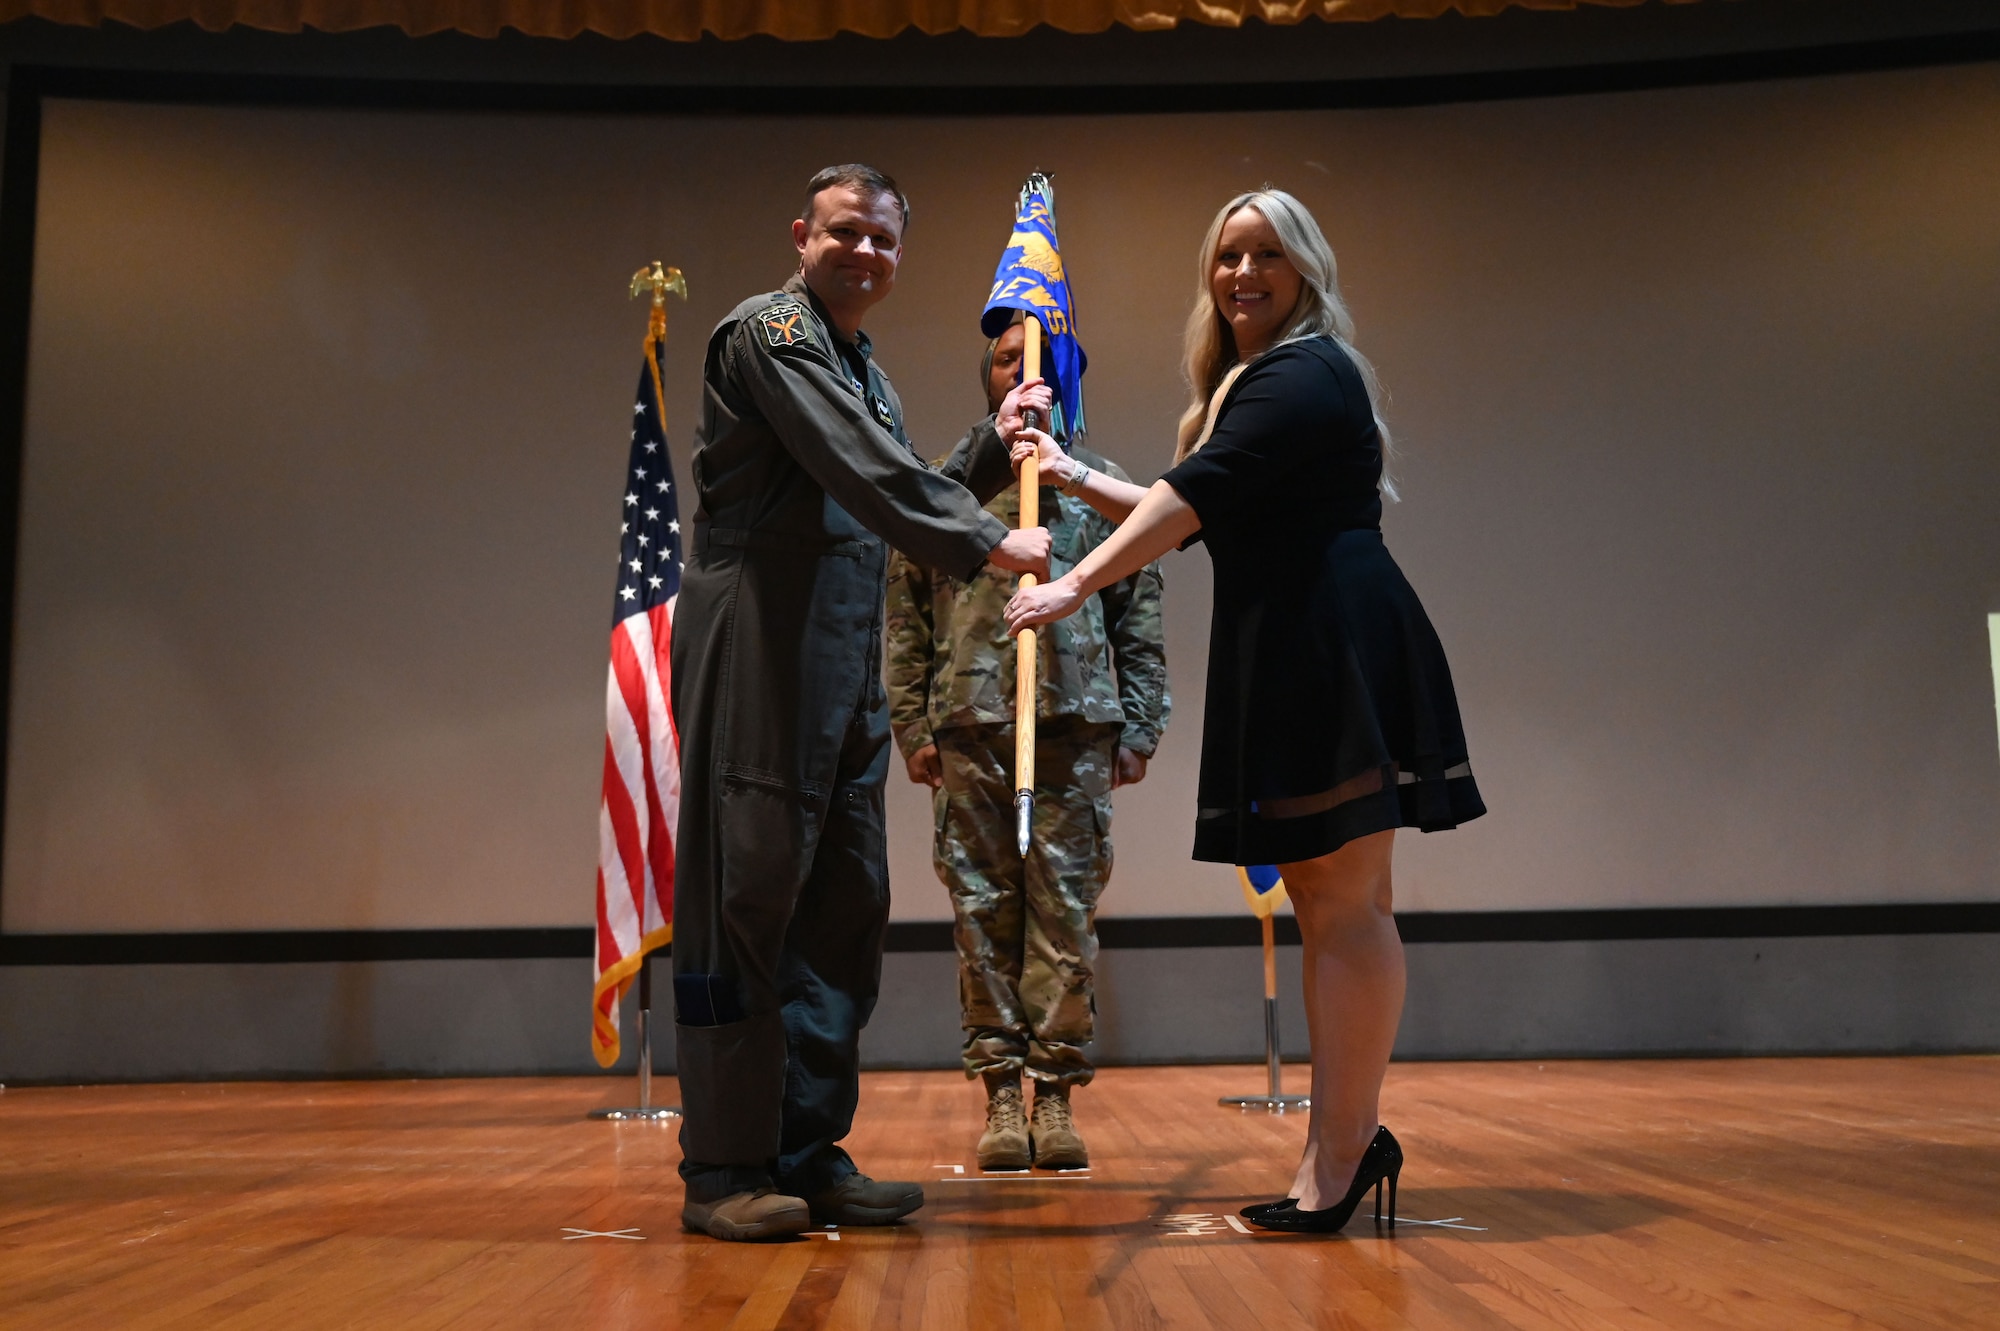 U.S. Air Force Lt. Col. Darren Woodside, 513th Electronic Warfare Squadron commander, inducts Katie Robison, director of sales for Liveoak Fiber, daughter of two Air Force veterans and member on the Greater Fort Walton Beach Chamber of Commerce, during the wing’s first Honorary Commander Induction ceremony, at Eglin Air Force Base, Fla., Dec. 1, 2023. Honorary Commanders serve as the liaison between the 350th Spectrum Warfare Wing and the surrounding community by maintaining strong relations through mutually beneficial professional partnership. (U.S. Air Force photo by Staff Sgt. Ericka A. Woolever)